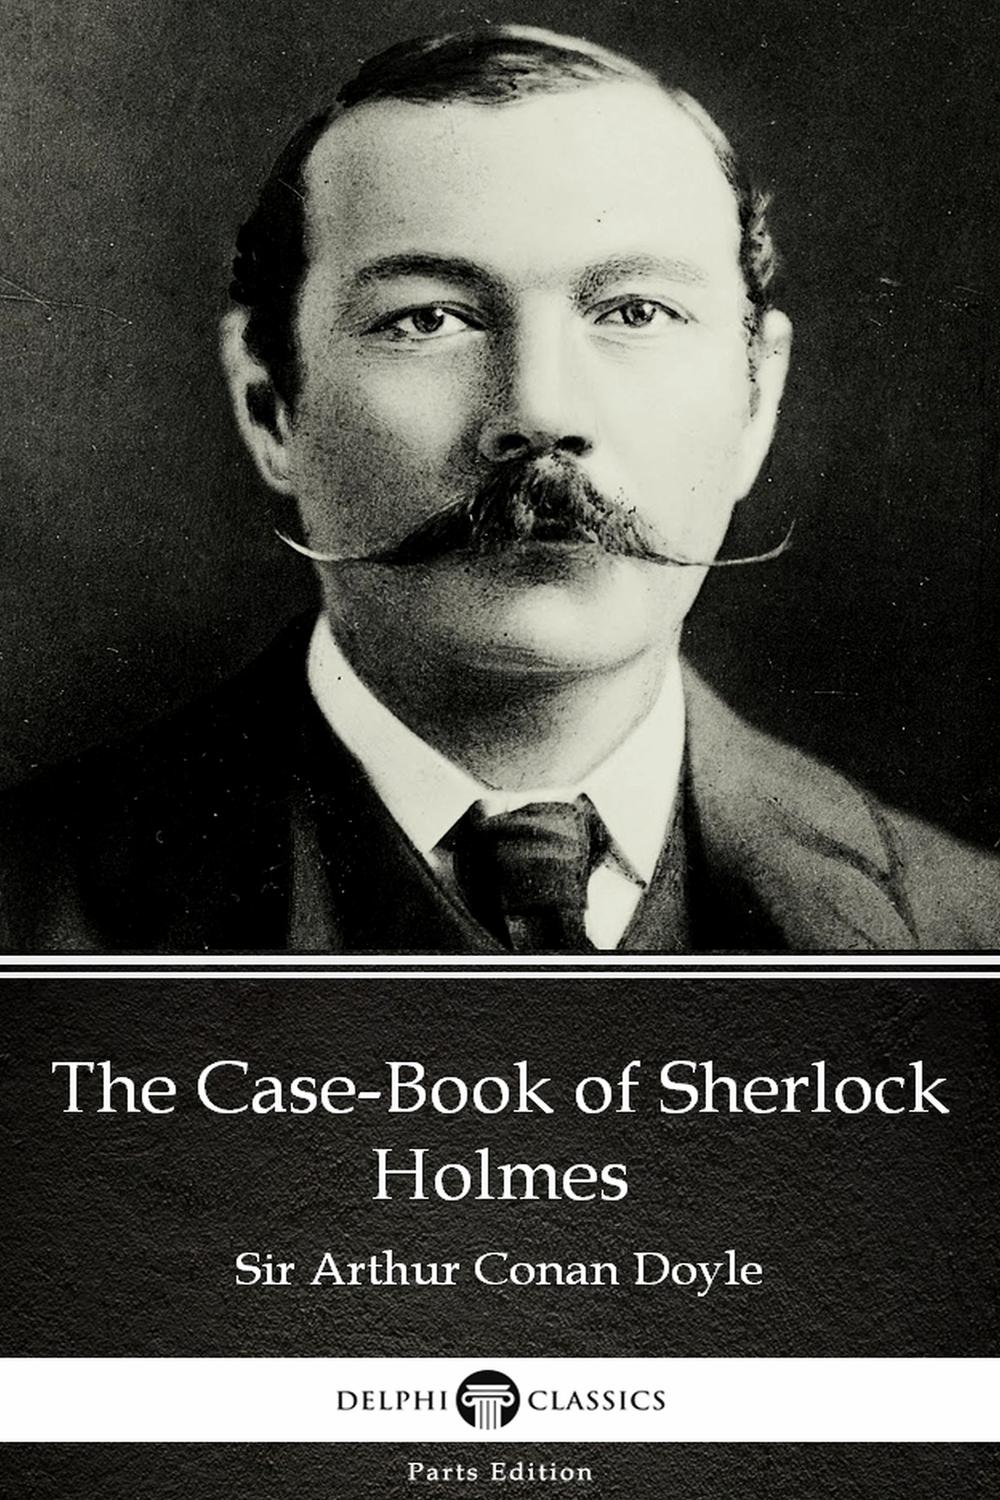 The Case-Book of Sherlock Holmes by Sir Arthur Conan Doyle (Illustrated) - Sir Arthur Conan Doyle,,Delphi Classics